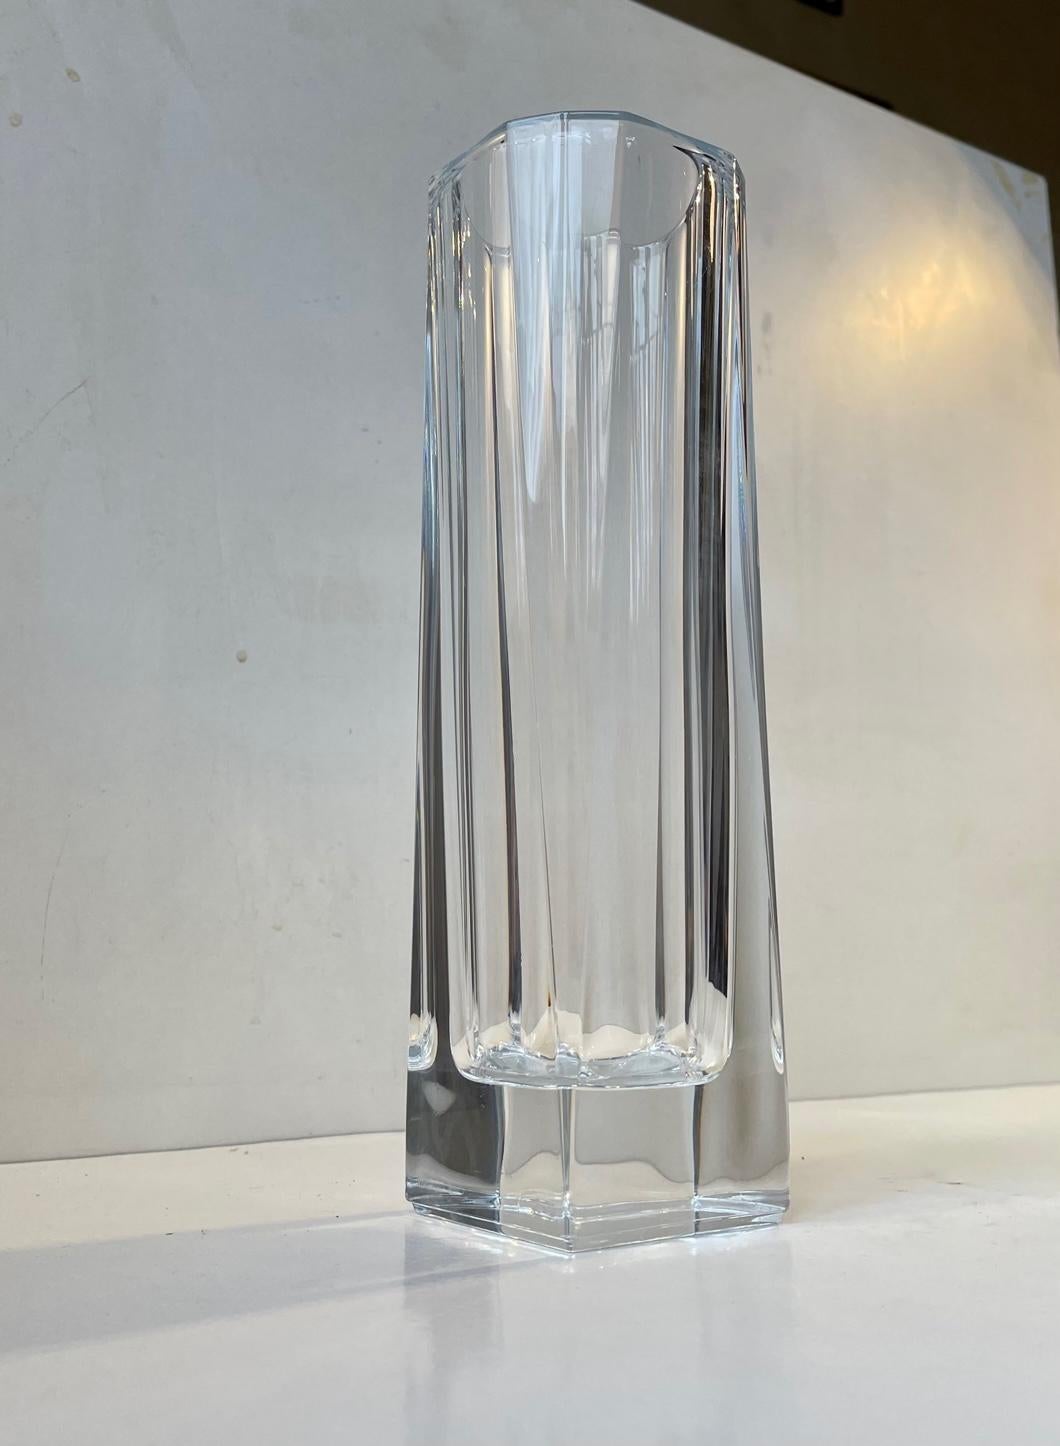 Strictly cut rectangular cristal vase - vastly faceted vertically. Unknown French maker in the style of Daum. No markings. It measures 26.5 cm in height and has a top-width 8x8 cm. Its condition is intact, clean and wellkept.